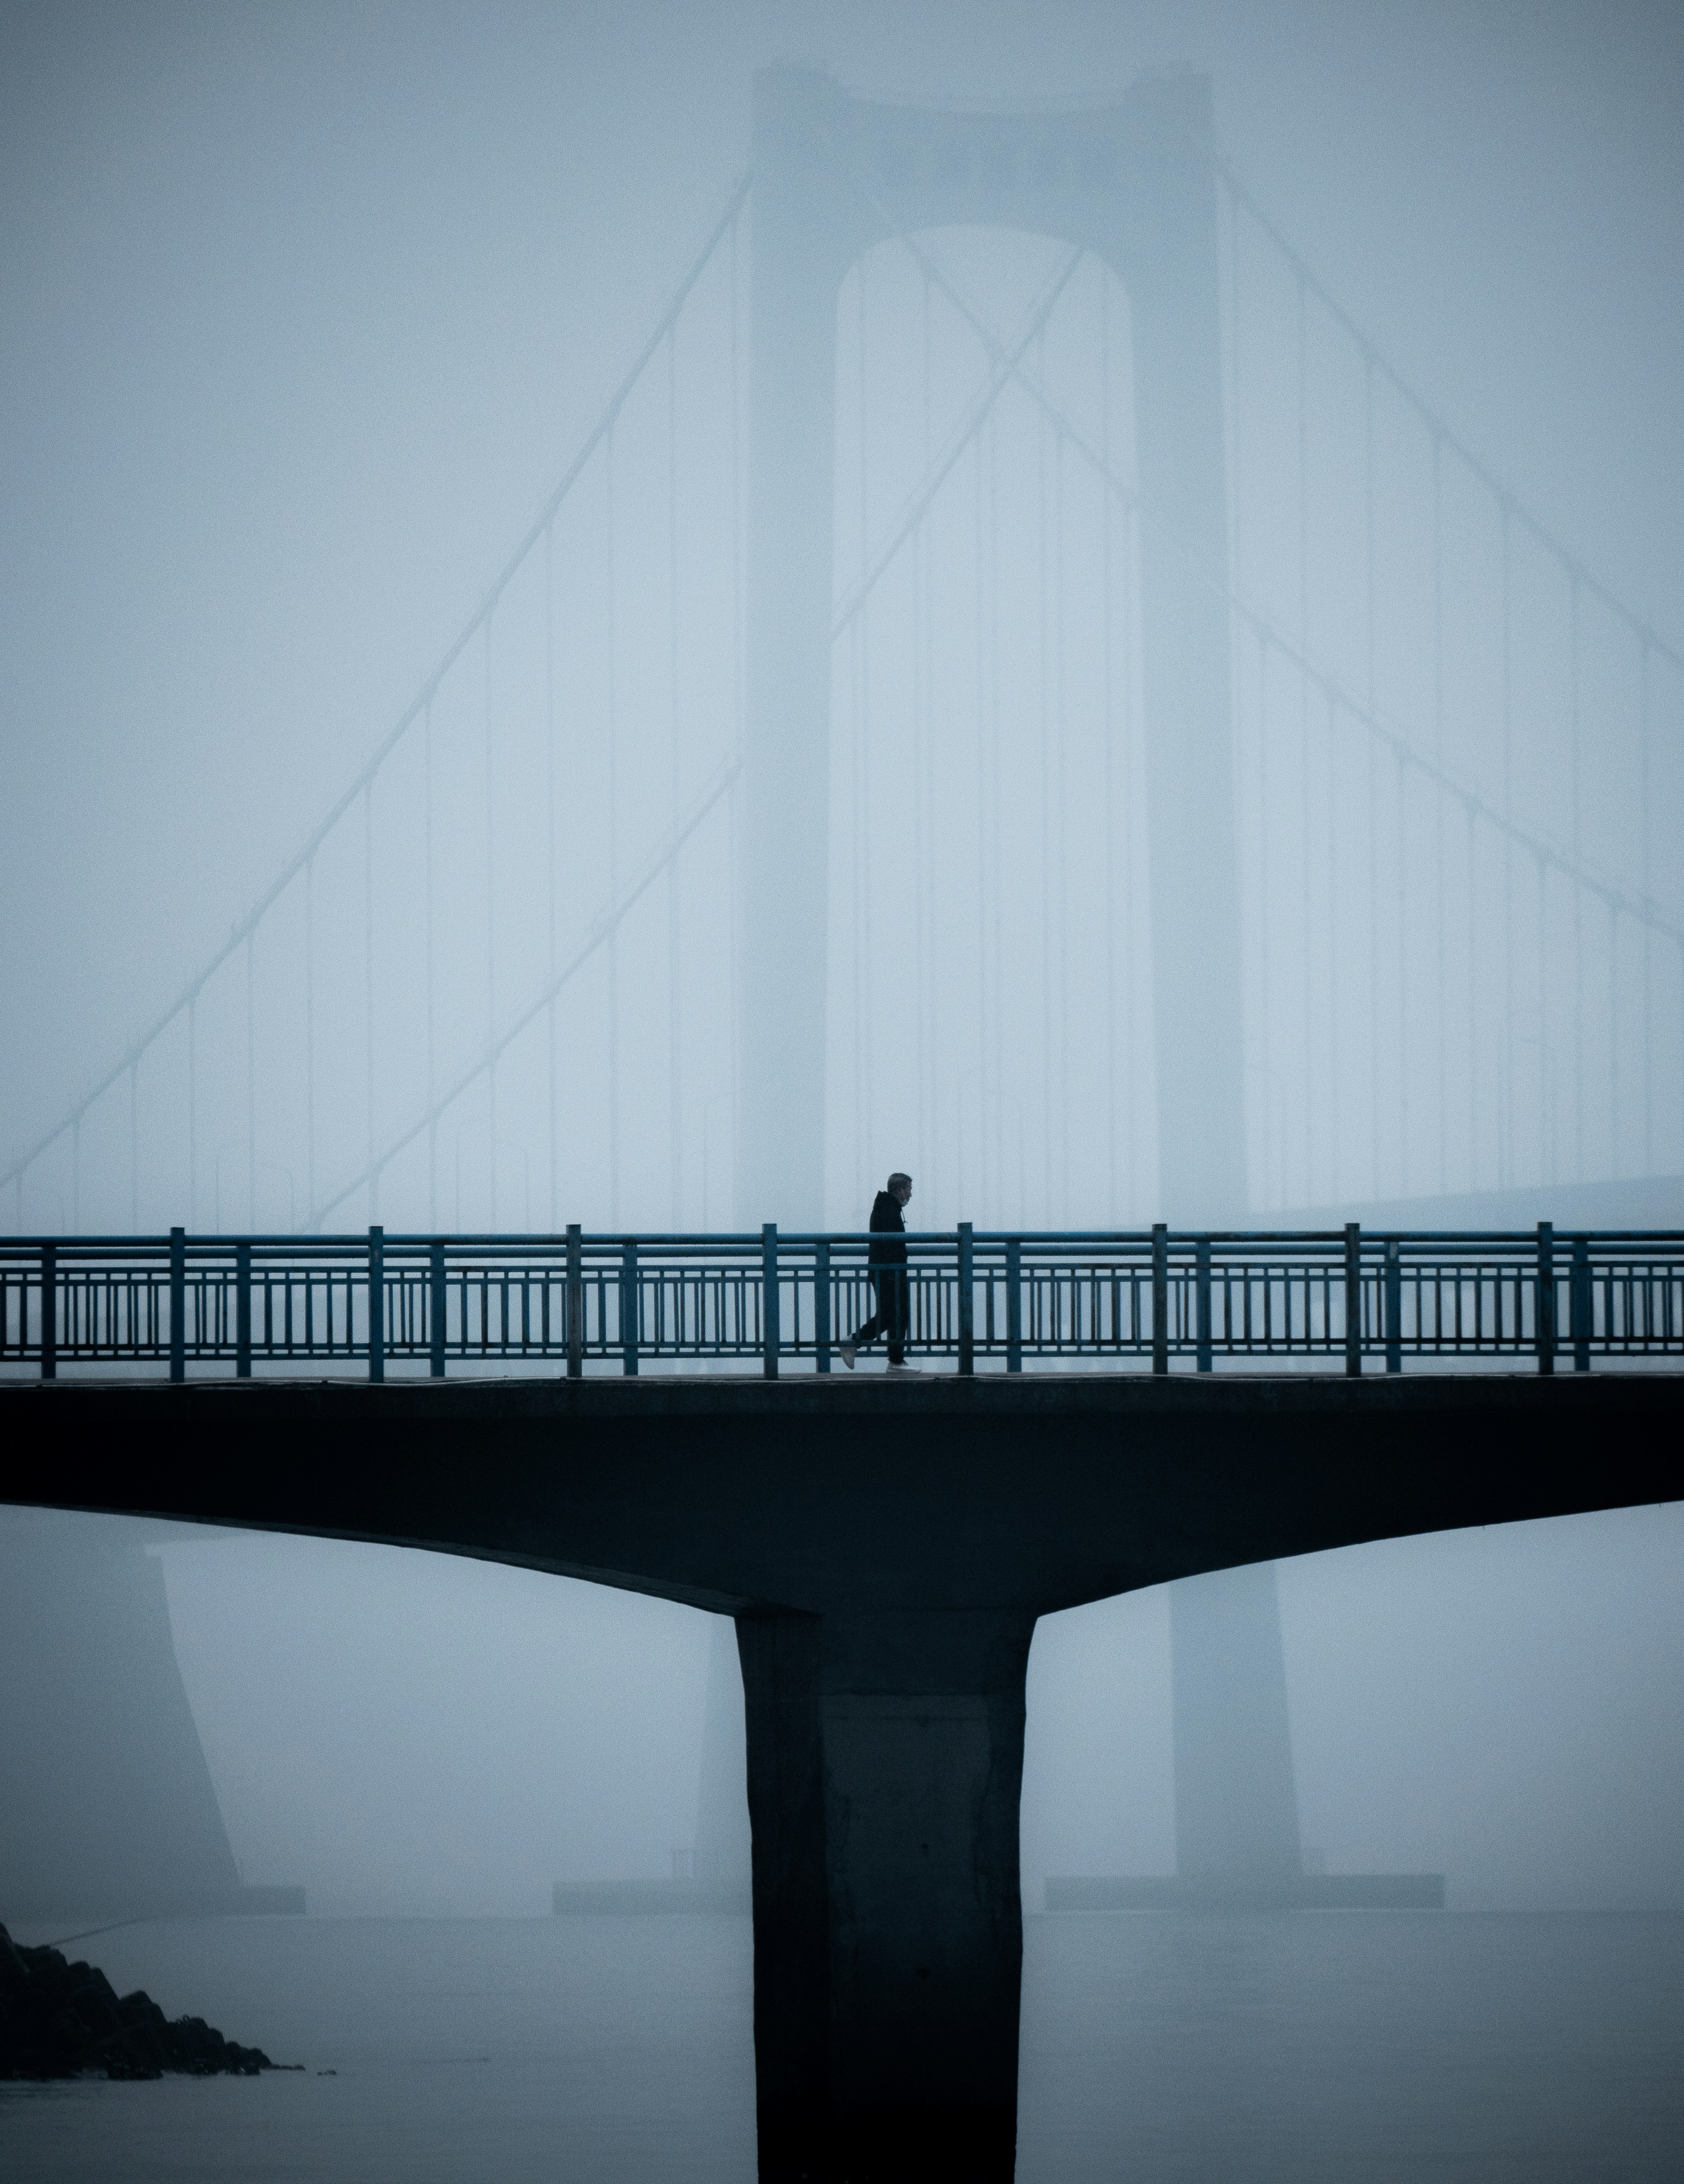 great photo recipe,how to photograph a man walking on a bridge in the foreground, with another big bridge in the background that is shrouded in fog.; a person walking across a bridge in the fog